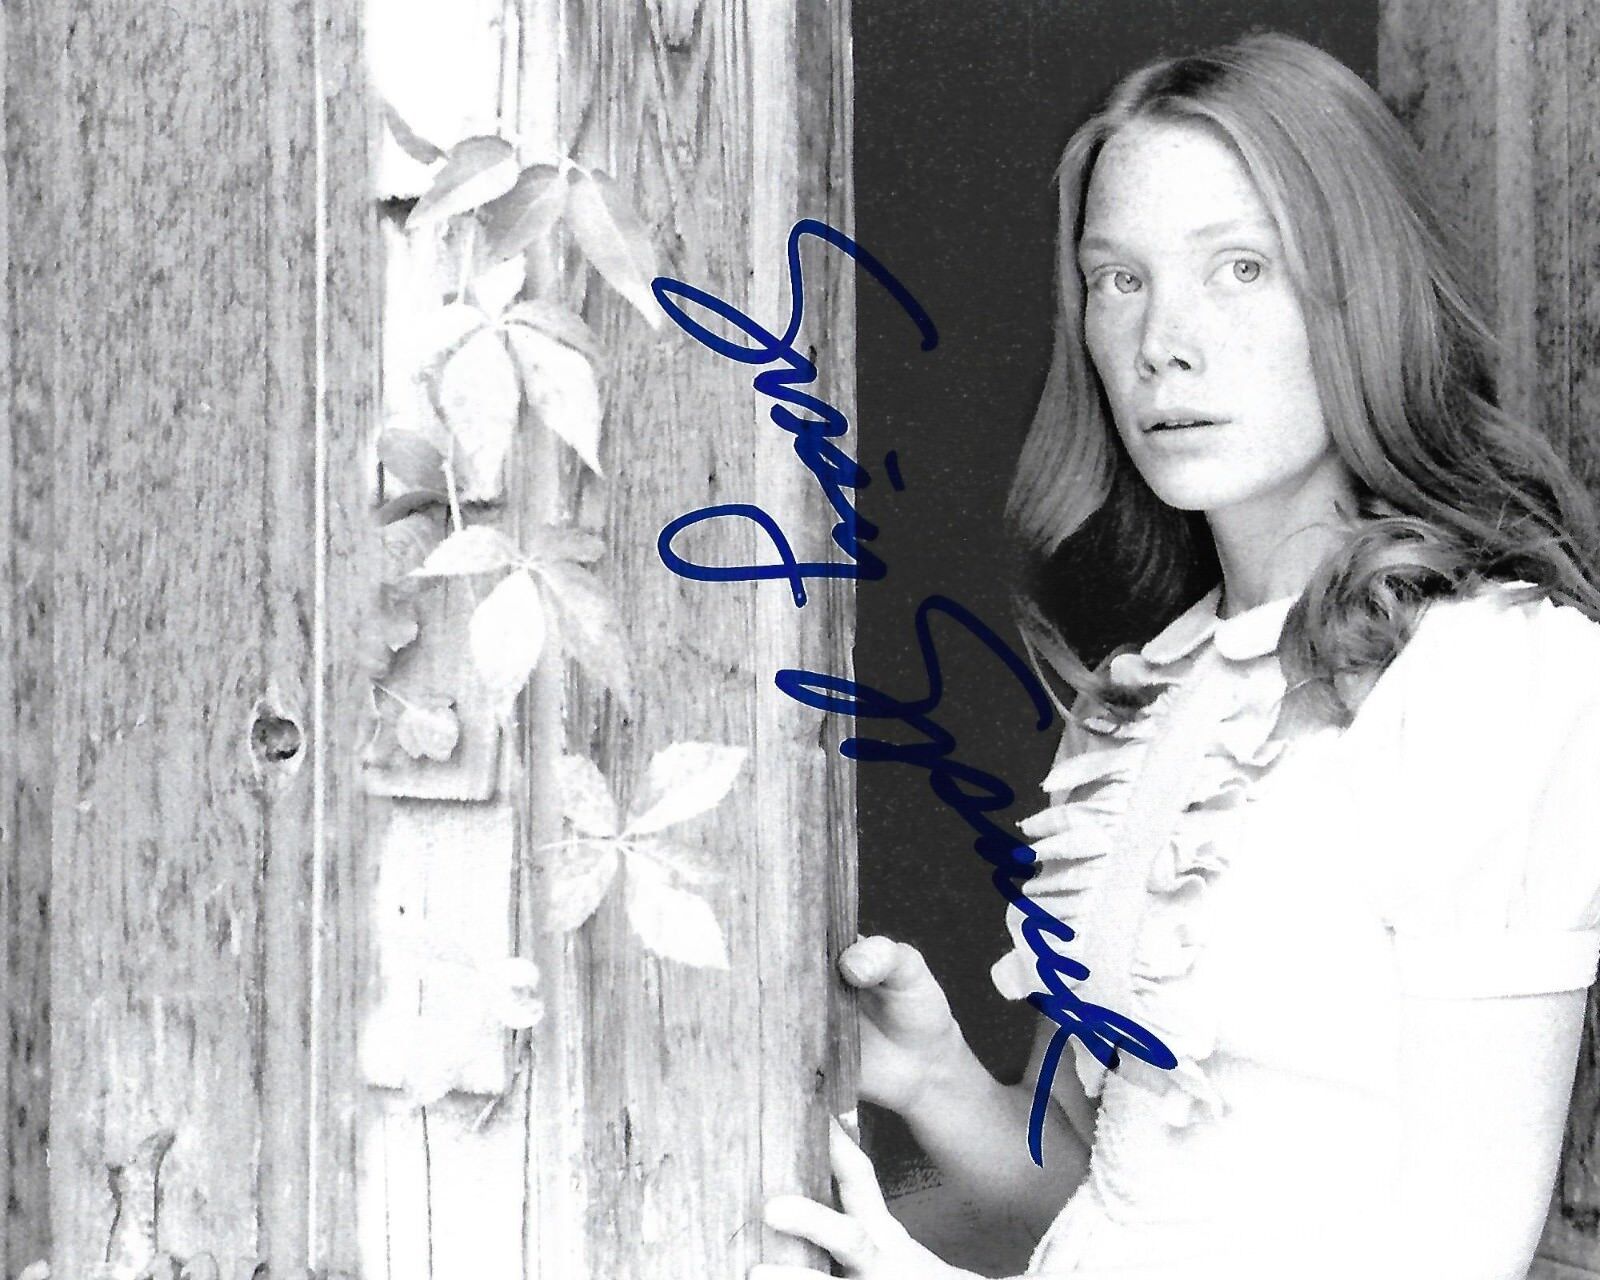 Sissy Spacek actress REAL hand SIGNED 8x10 Photo Poster painting #2 w/ COA Autographed Carrie